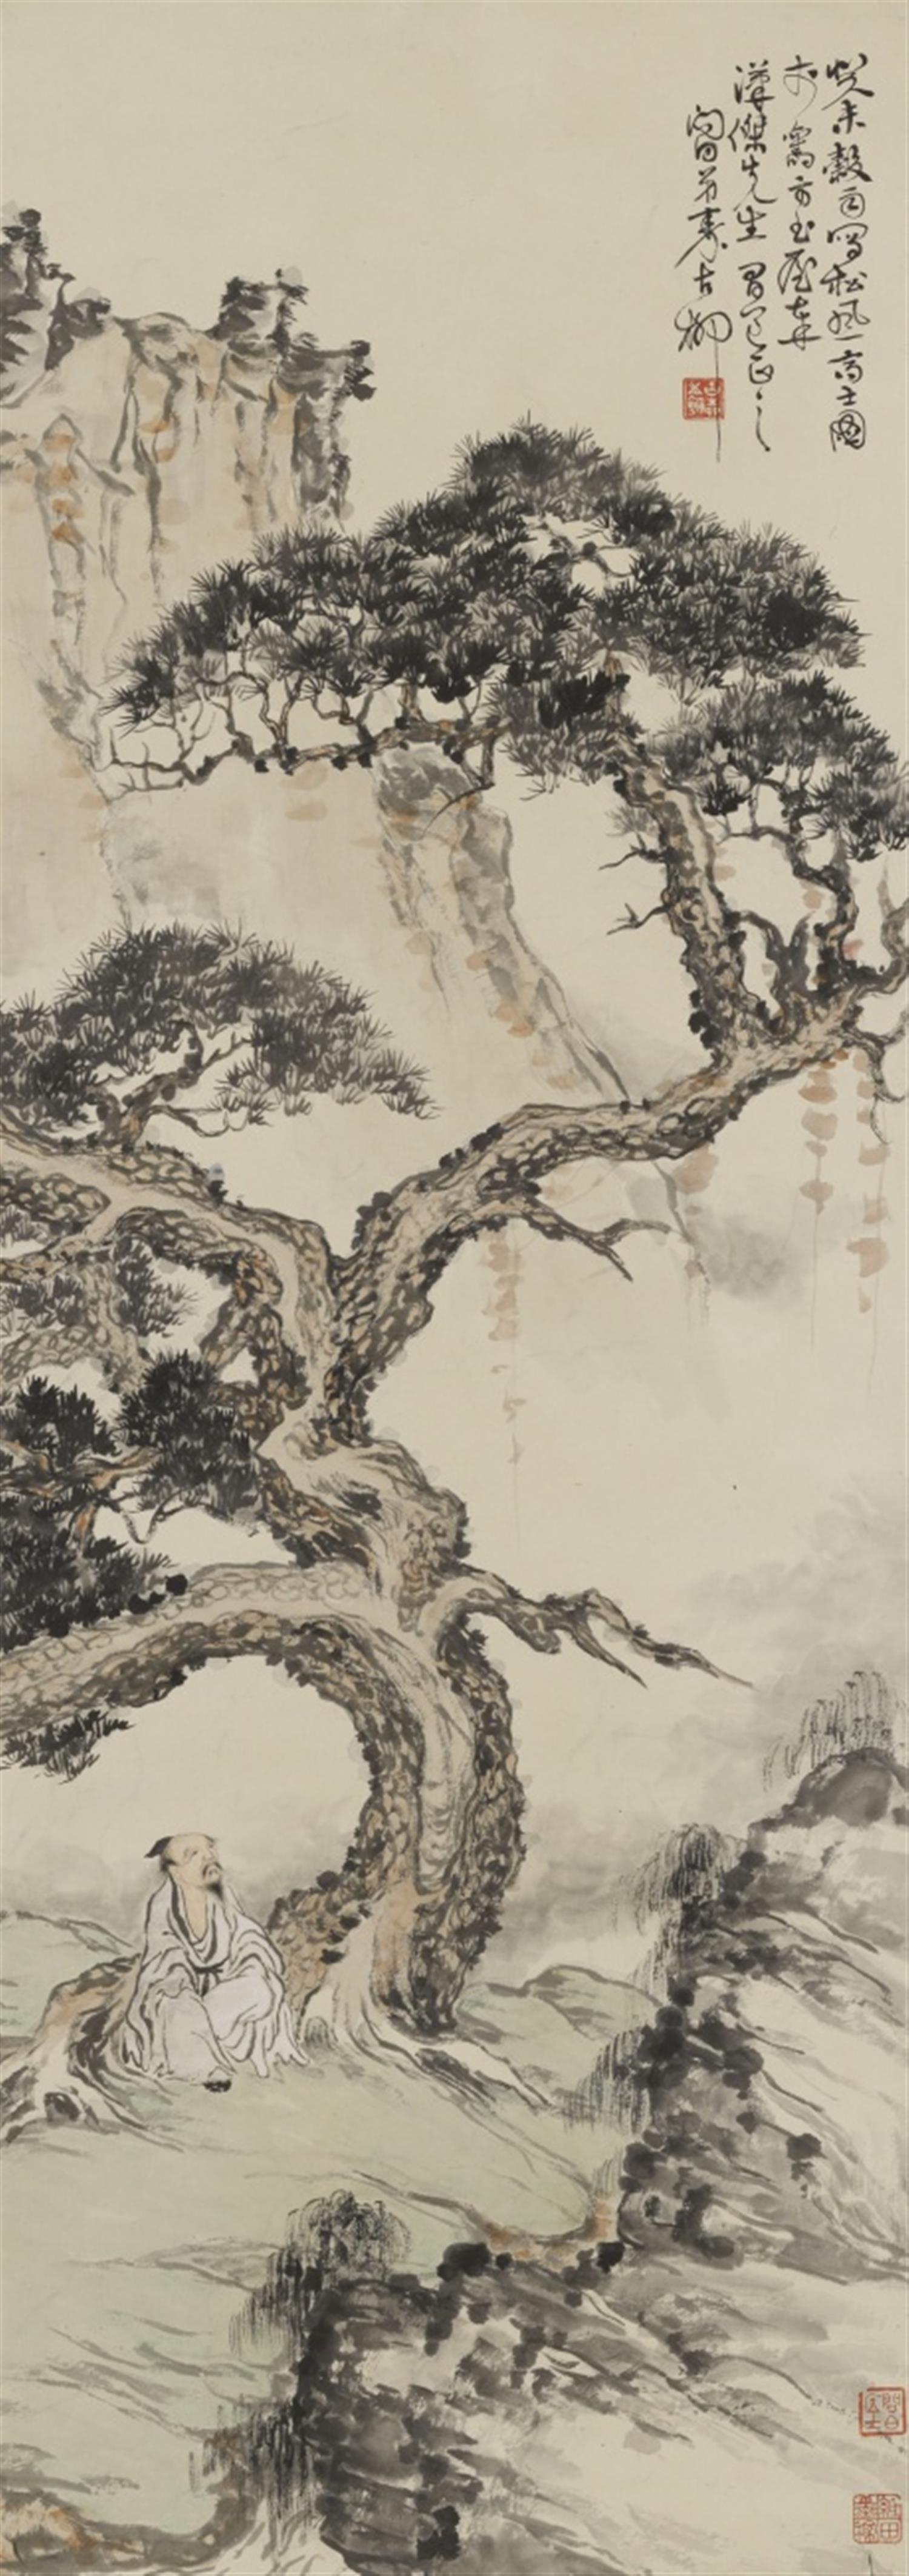 Qin Guliu - "Scholar listening to the wind in the pines." Ink and colour on paper. Inscription, dated cyclically guiwei (1943), signed Qin Guliu and sealed Guliu ..., Wen bai ju shi and Zhi... - image-1